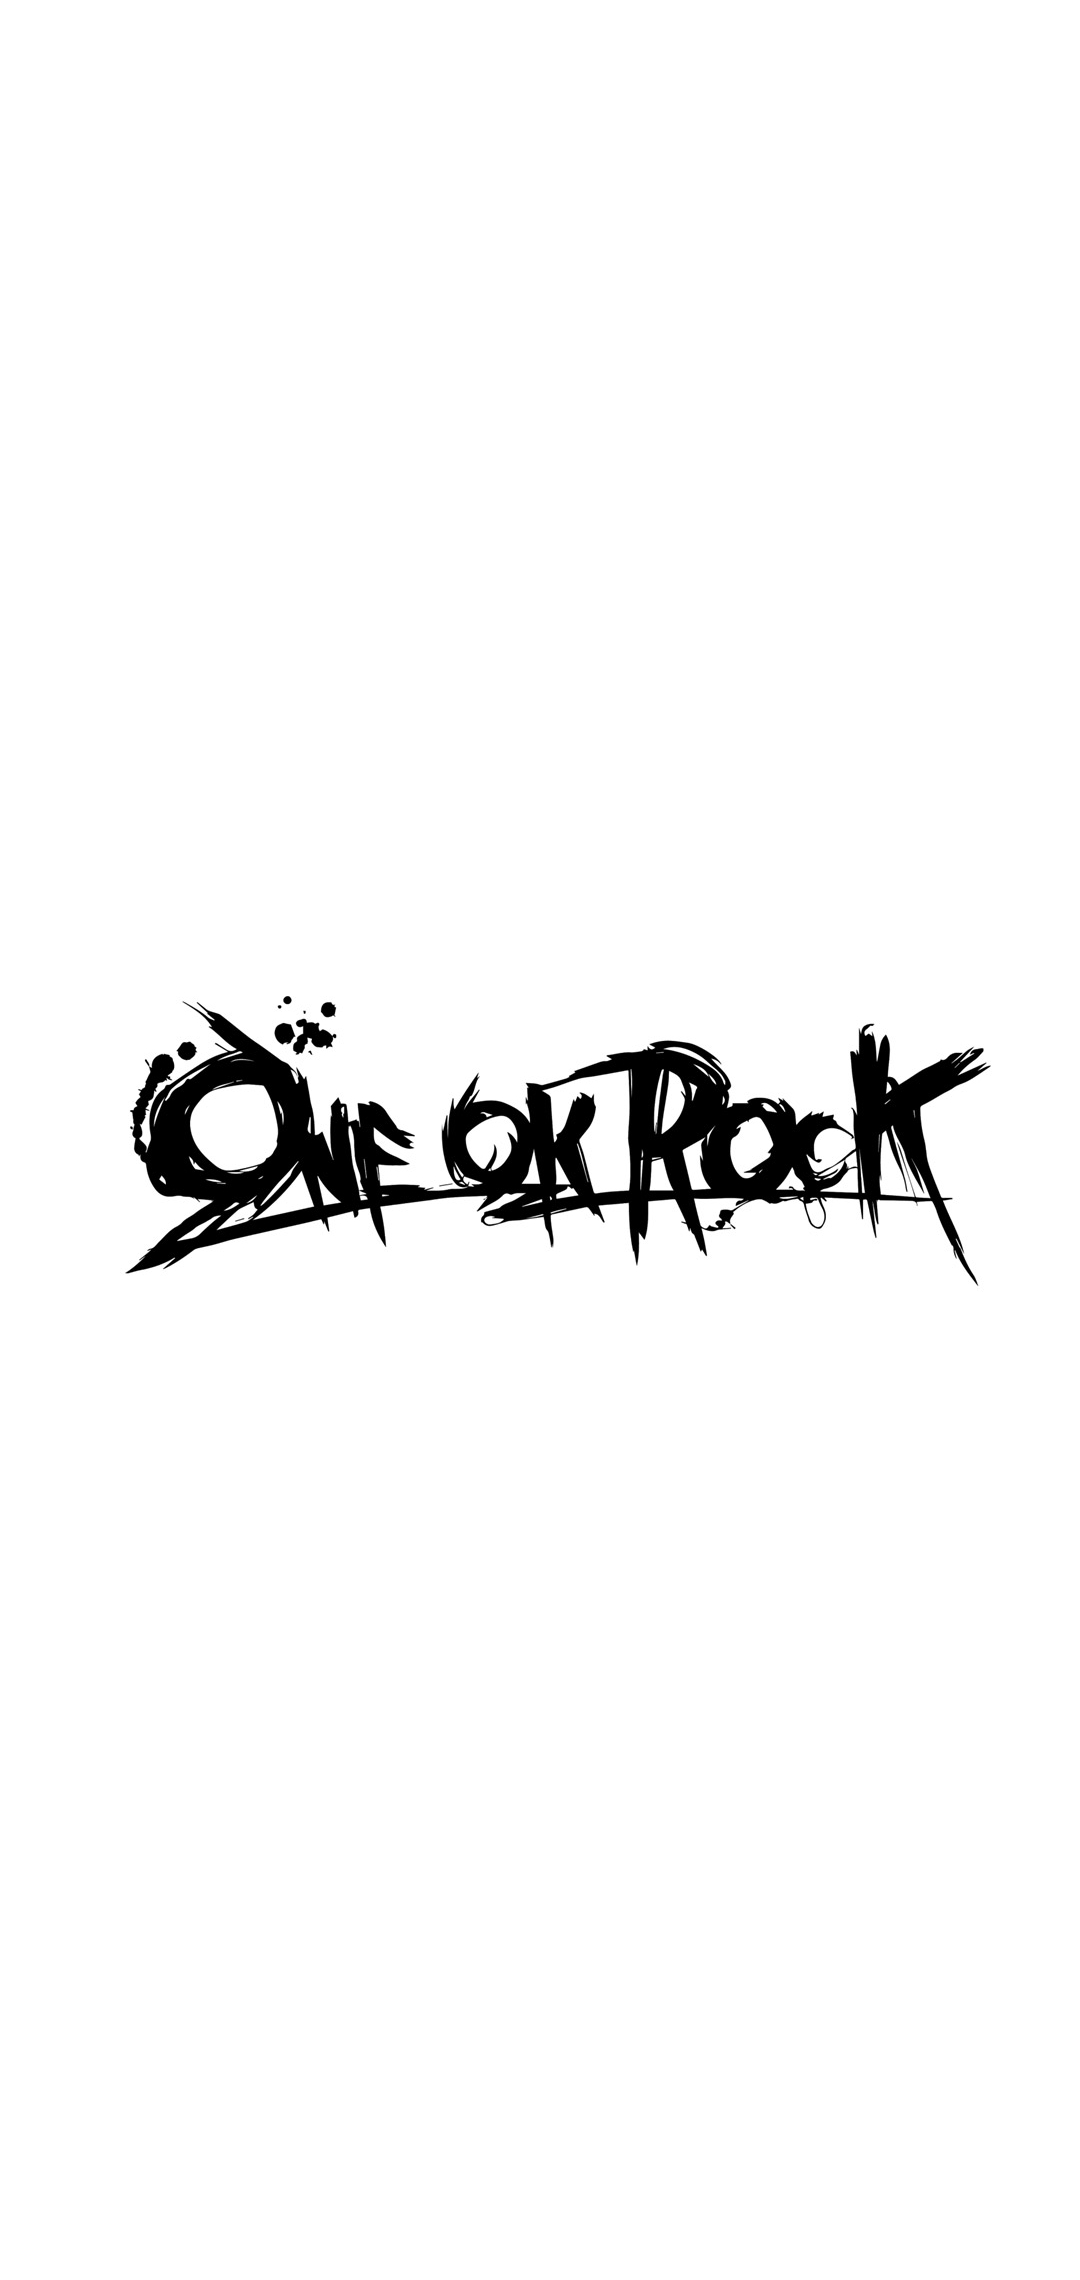 One Ok Rock Android One S8 壁紙 待ち受け スマラン